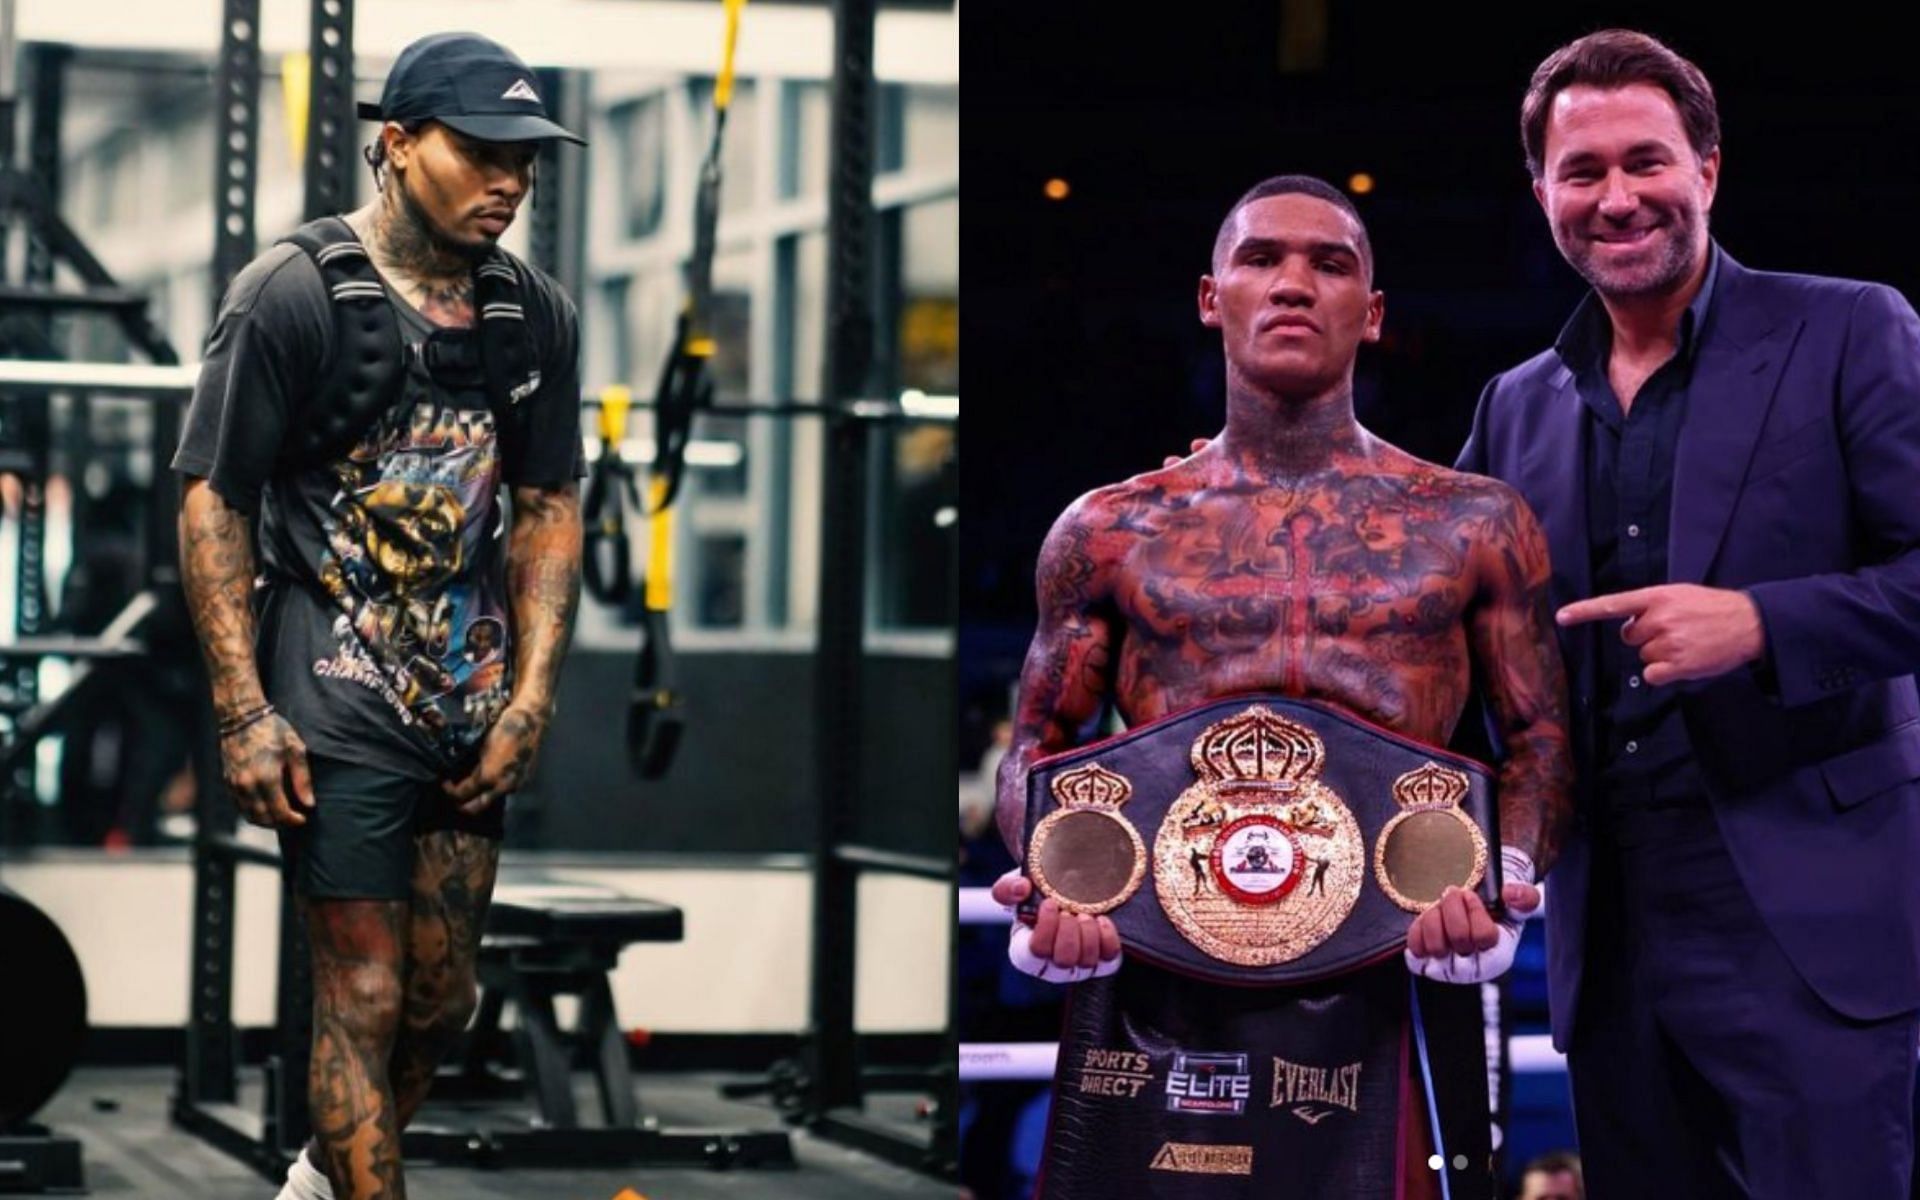 Gervonta Davis has been in discussions to fight Conor Benn. [Images via @gervontaa and @conorbennofficial on Instagram]